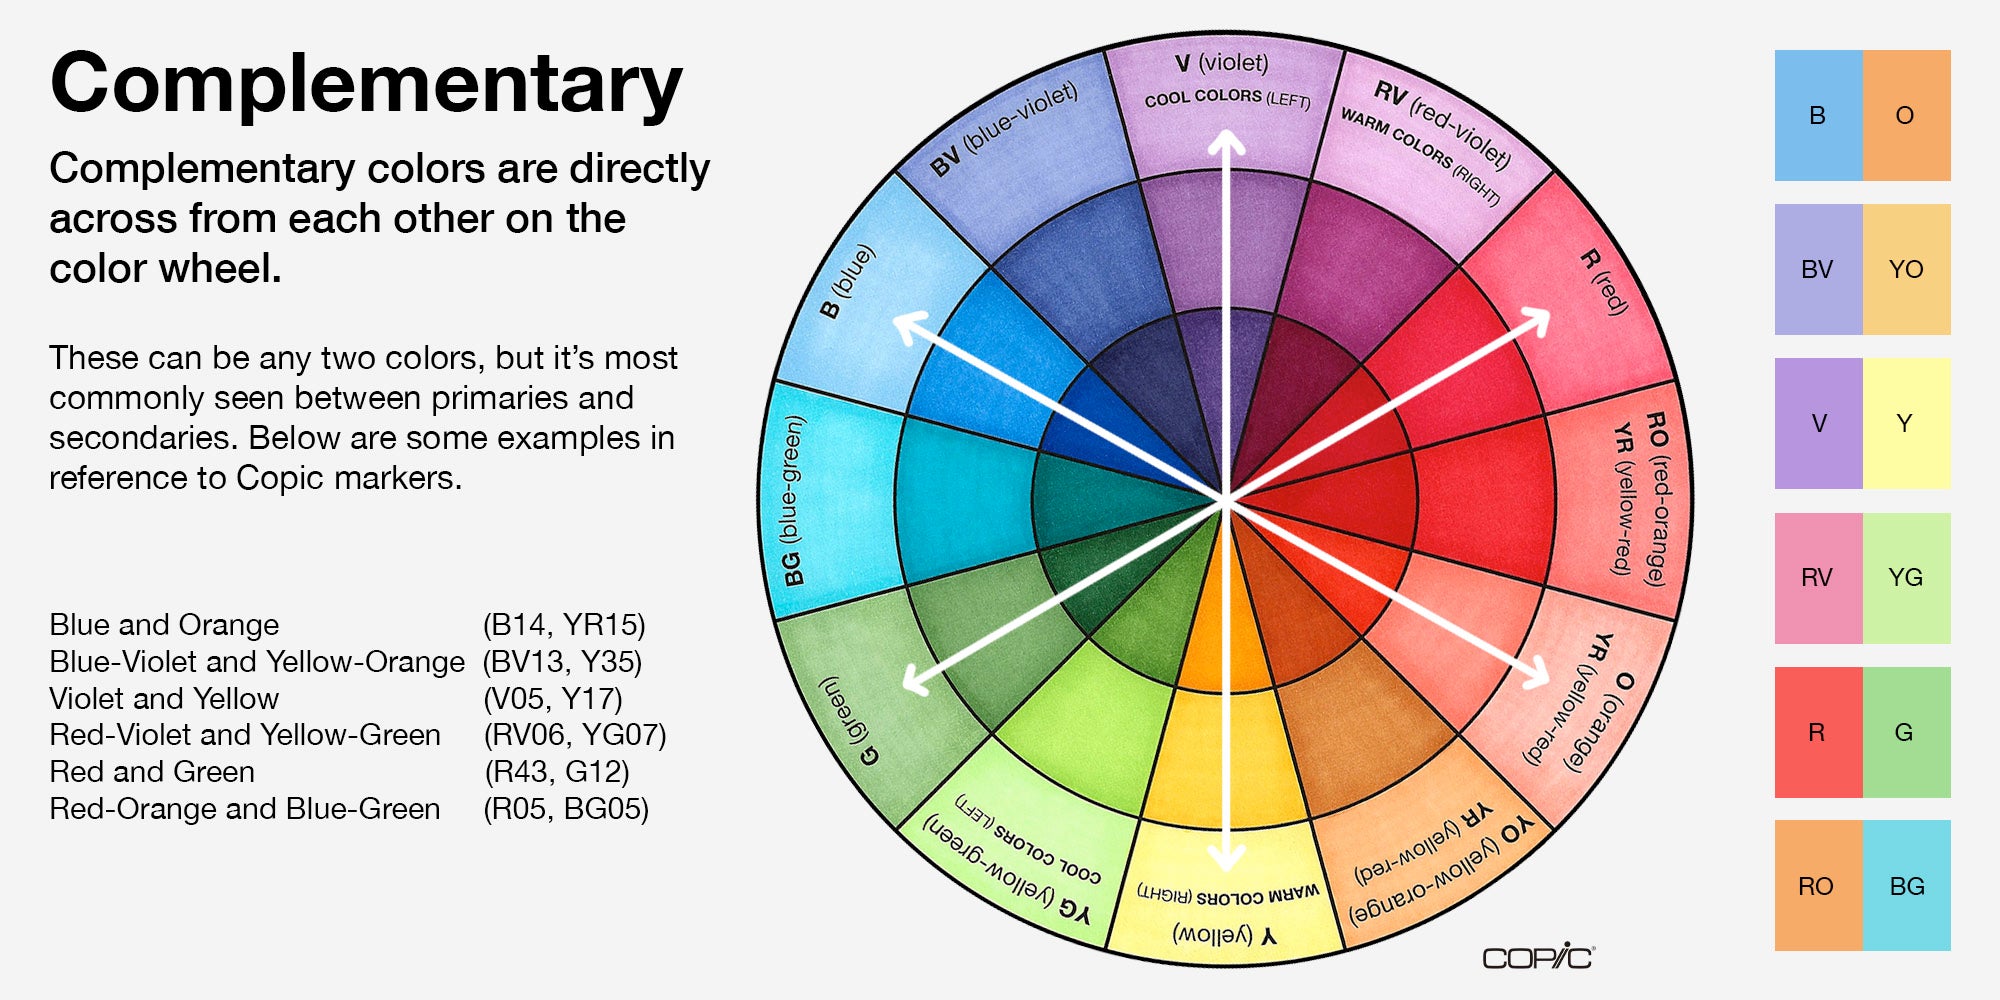 What are Complimentary colors?